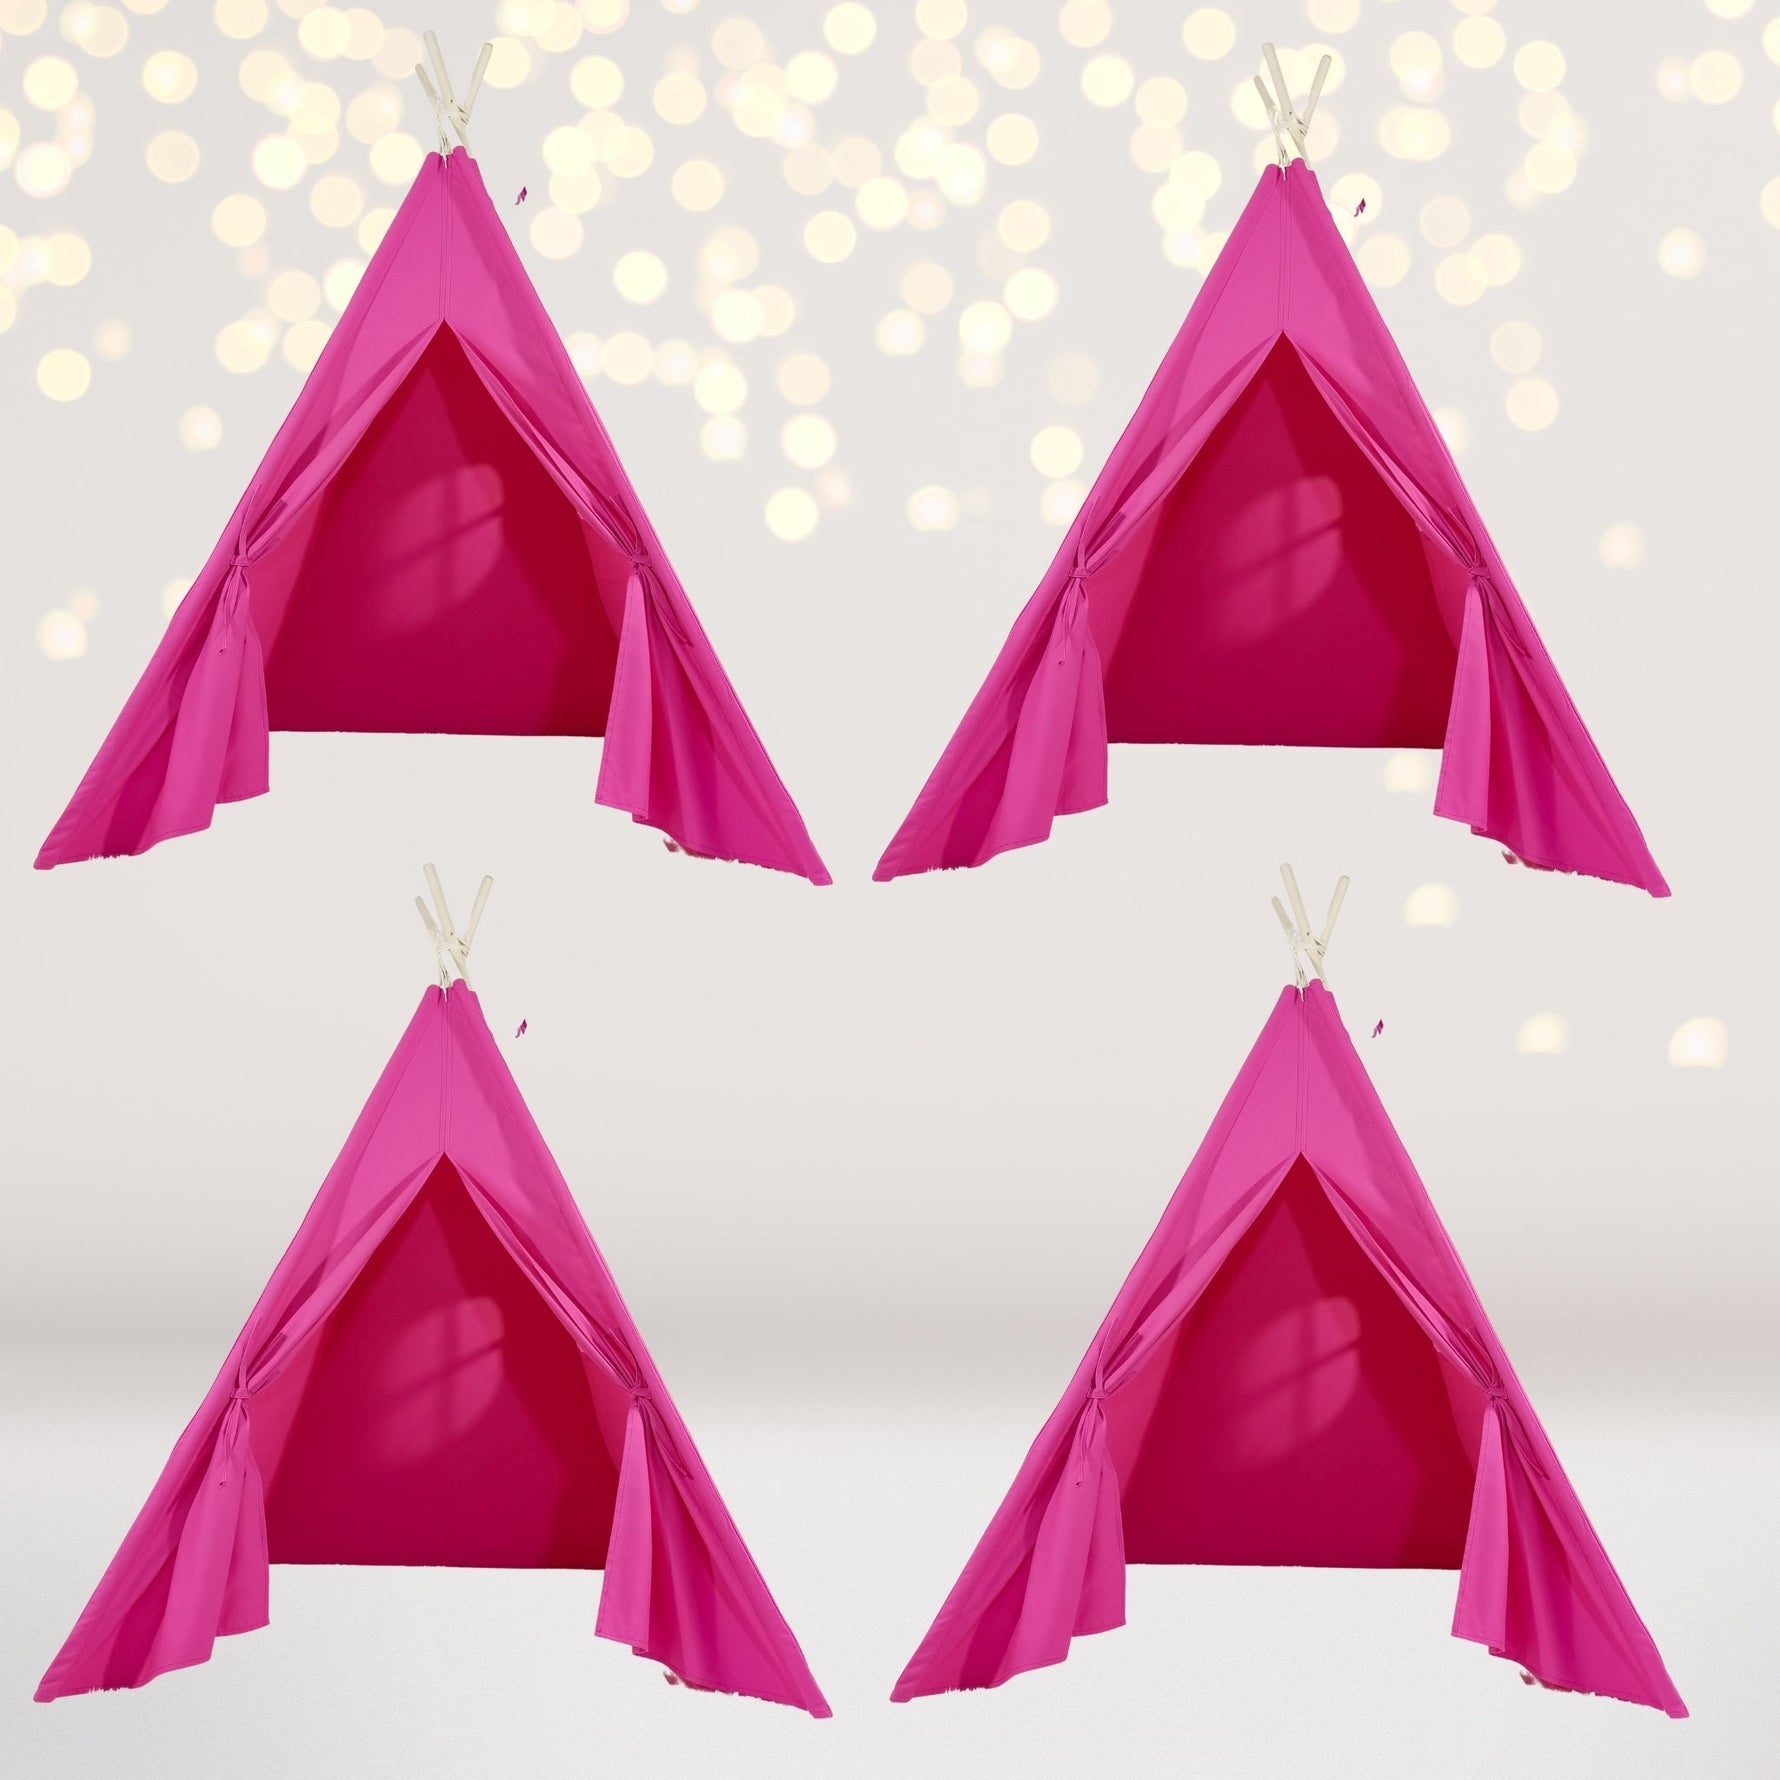 4 pack Kids Sleepover Tents-LUXE Kids Teepee Tent with Lights-Party Pack Hot Pink